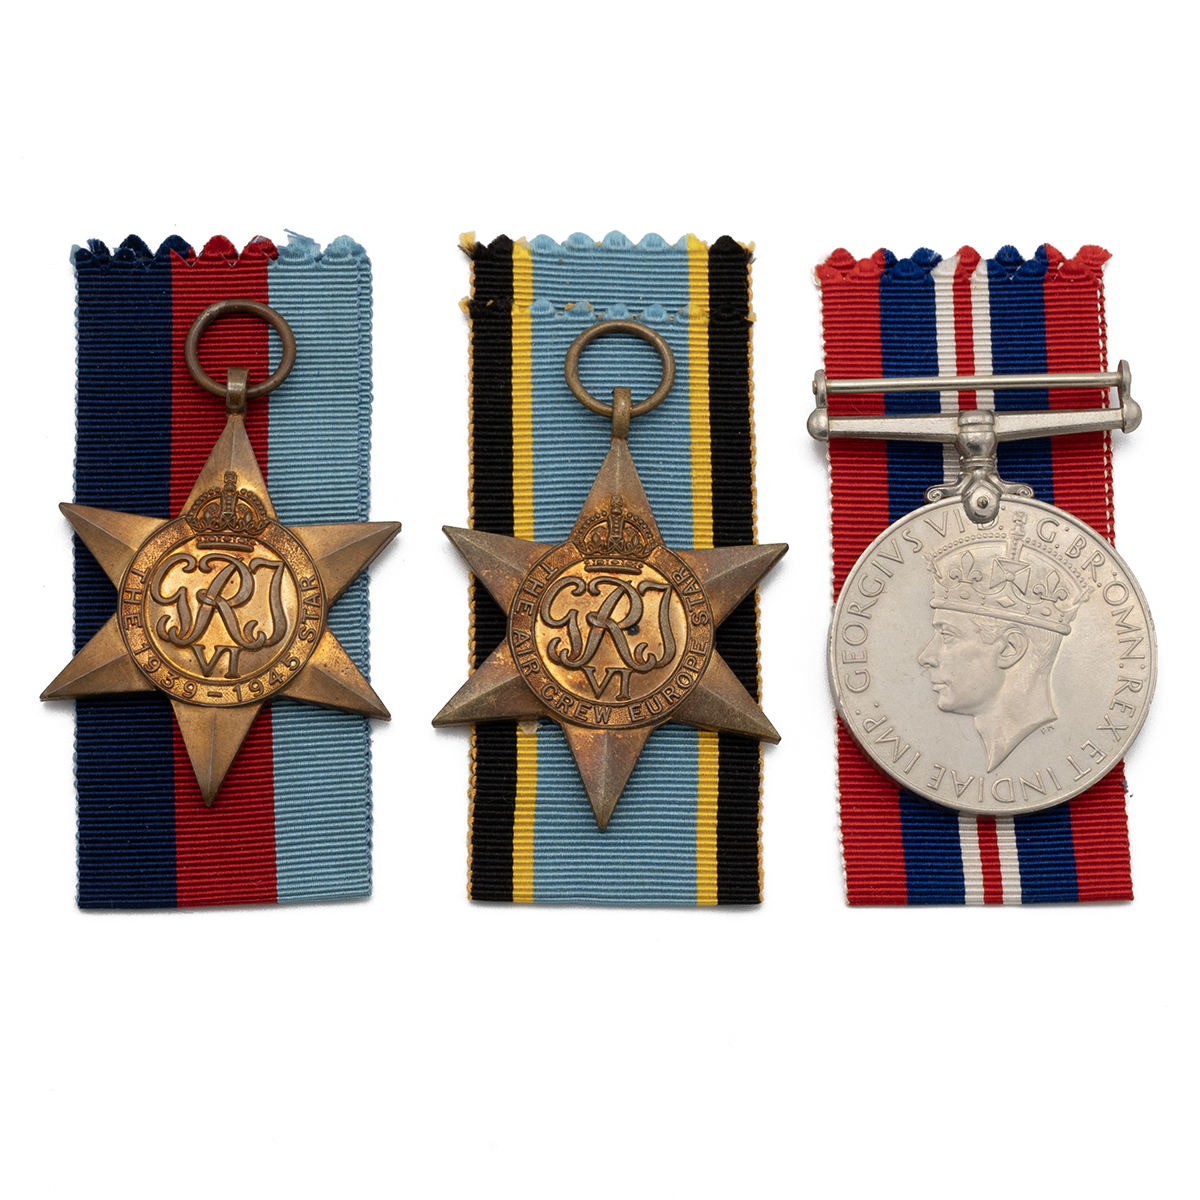 Medals (3) of Flt. Lt Gerald Wilton R.A.F. 1939-1945 Star, Air Crew Europe Star, and 1939-1945 Wa... - Image 2 of 4